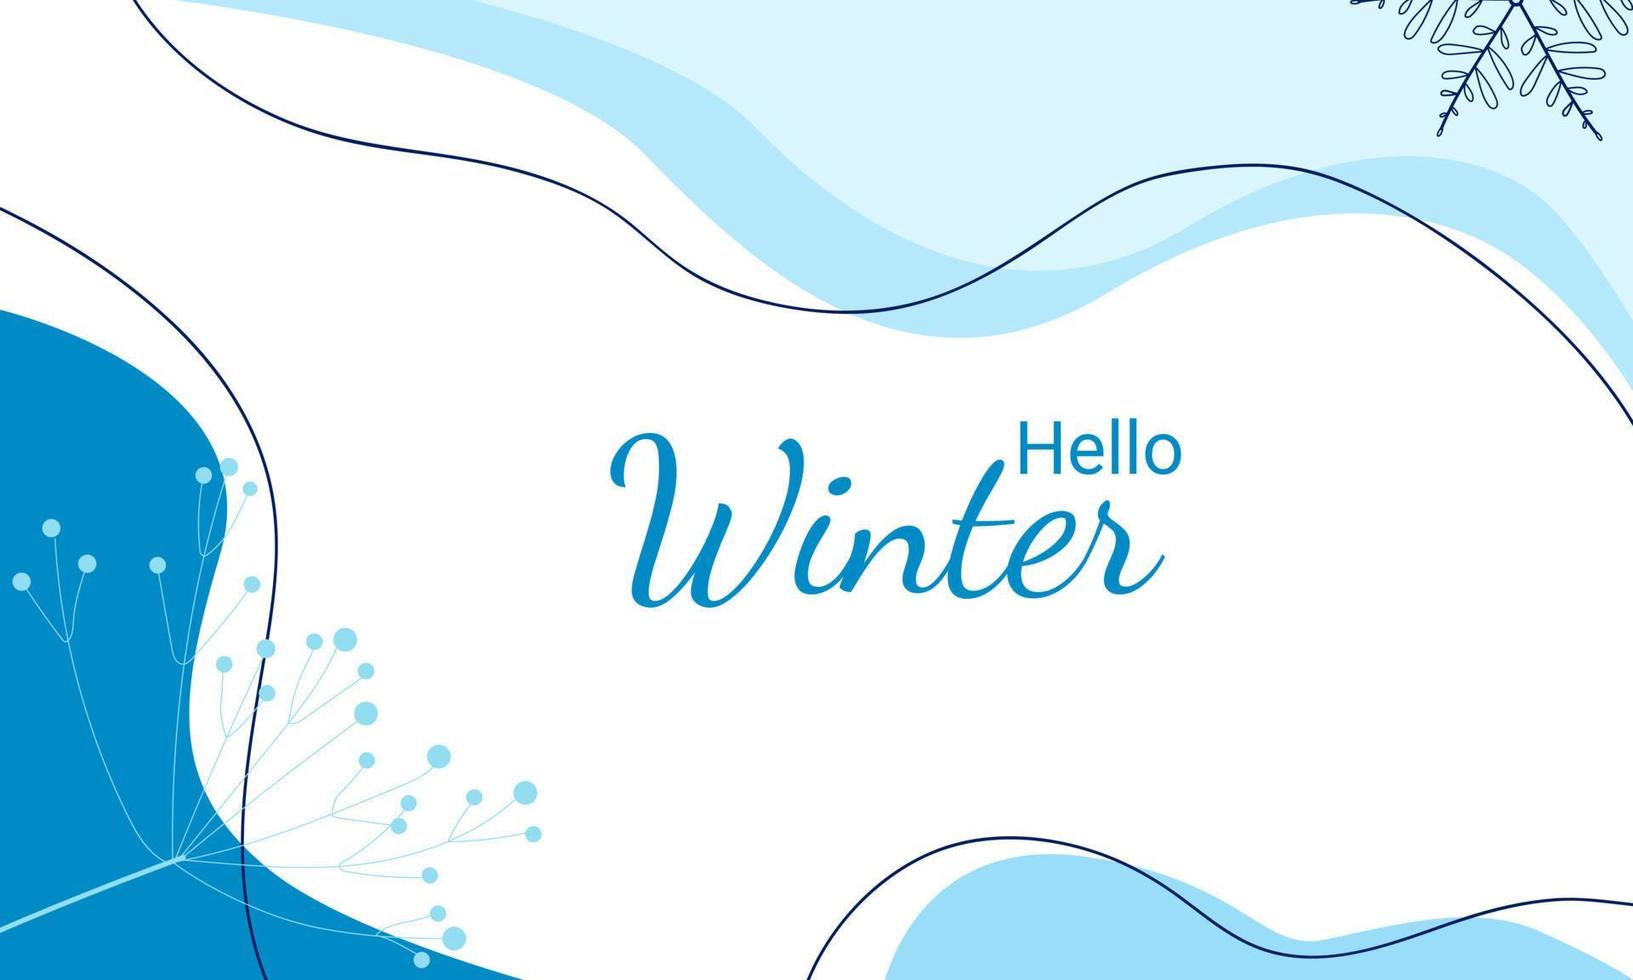 Winter colorful abstract background in blue tones with a branch vector